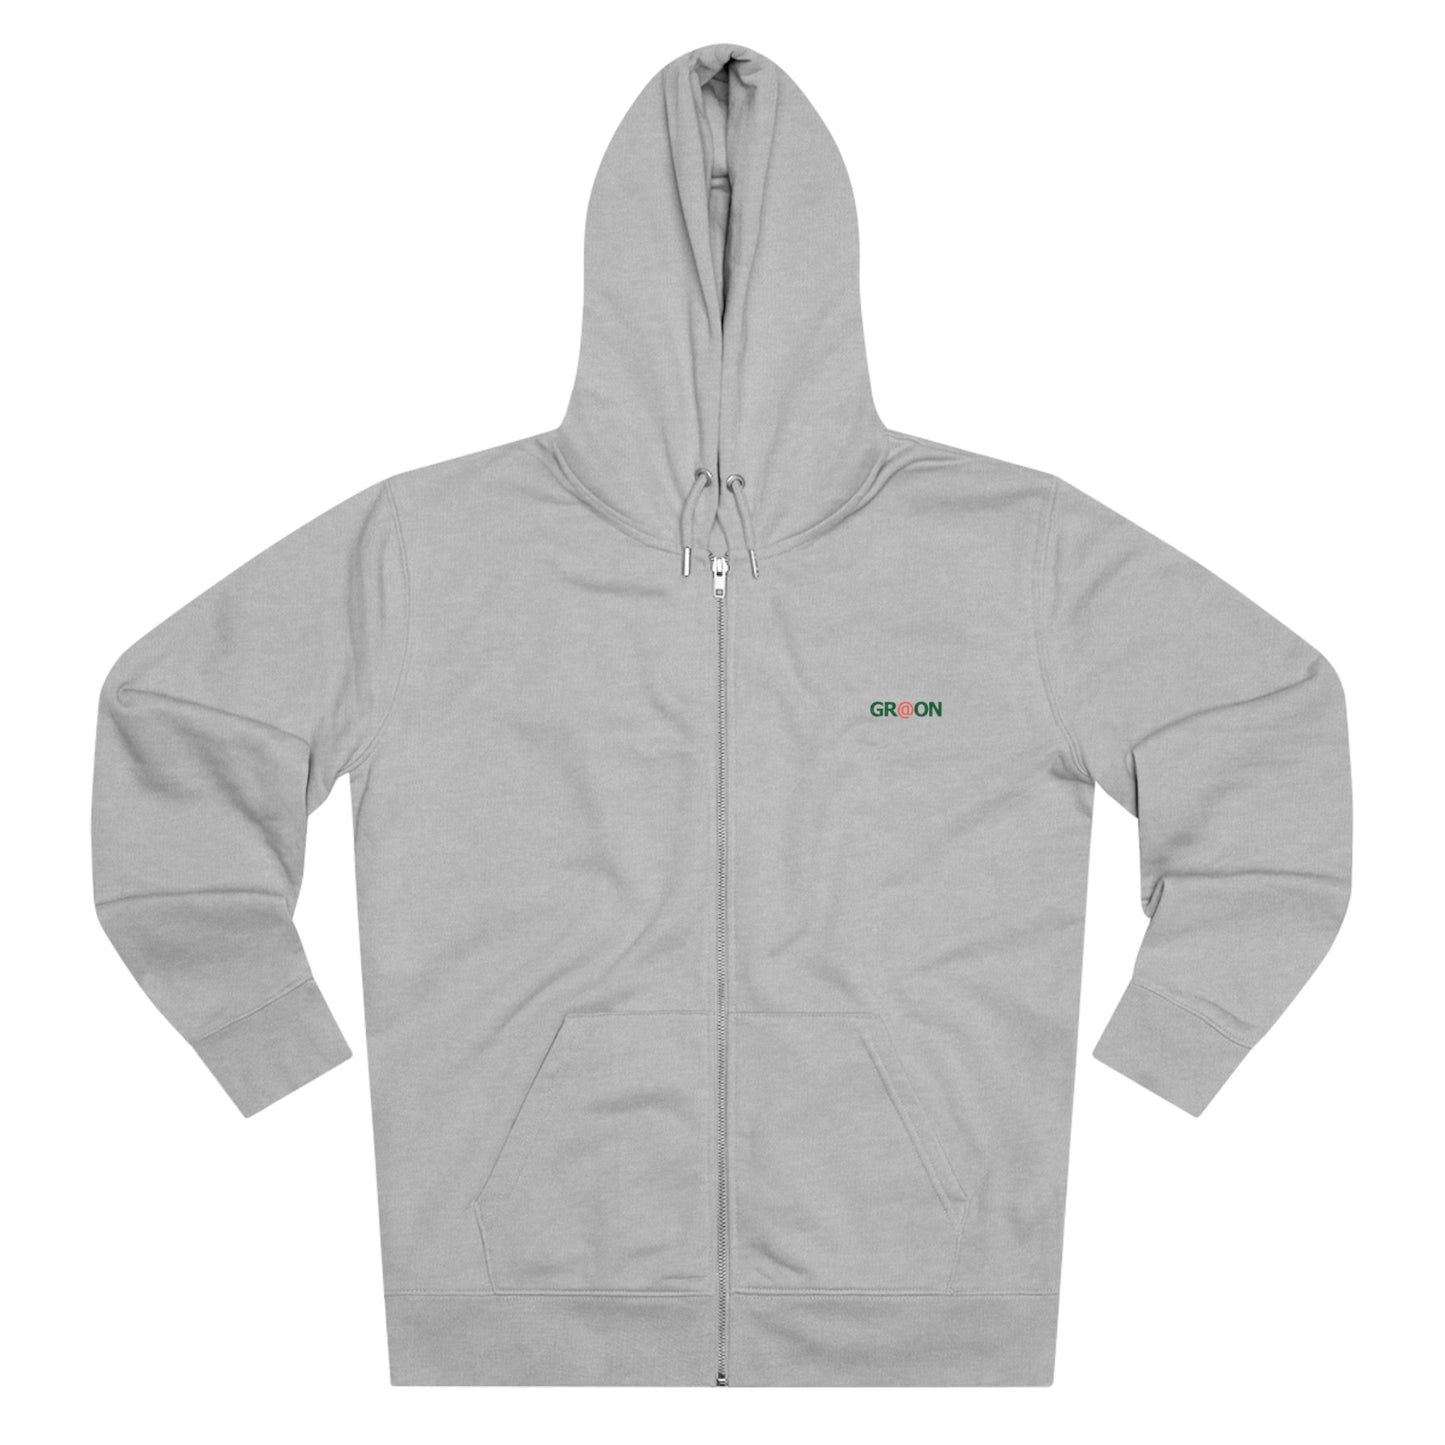 Eco-Friendly Organic - Unisex's Cultivator Zip Hoodie - International Day of Forests graphic